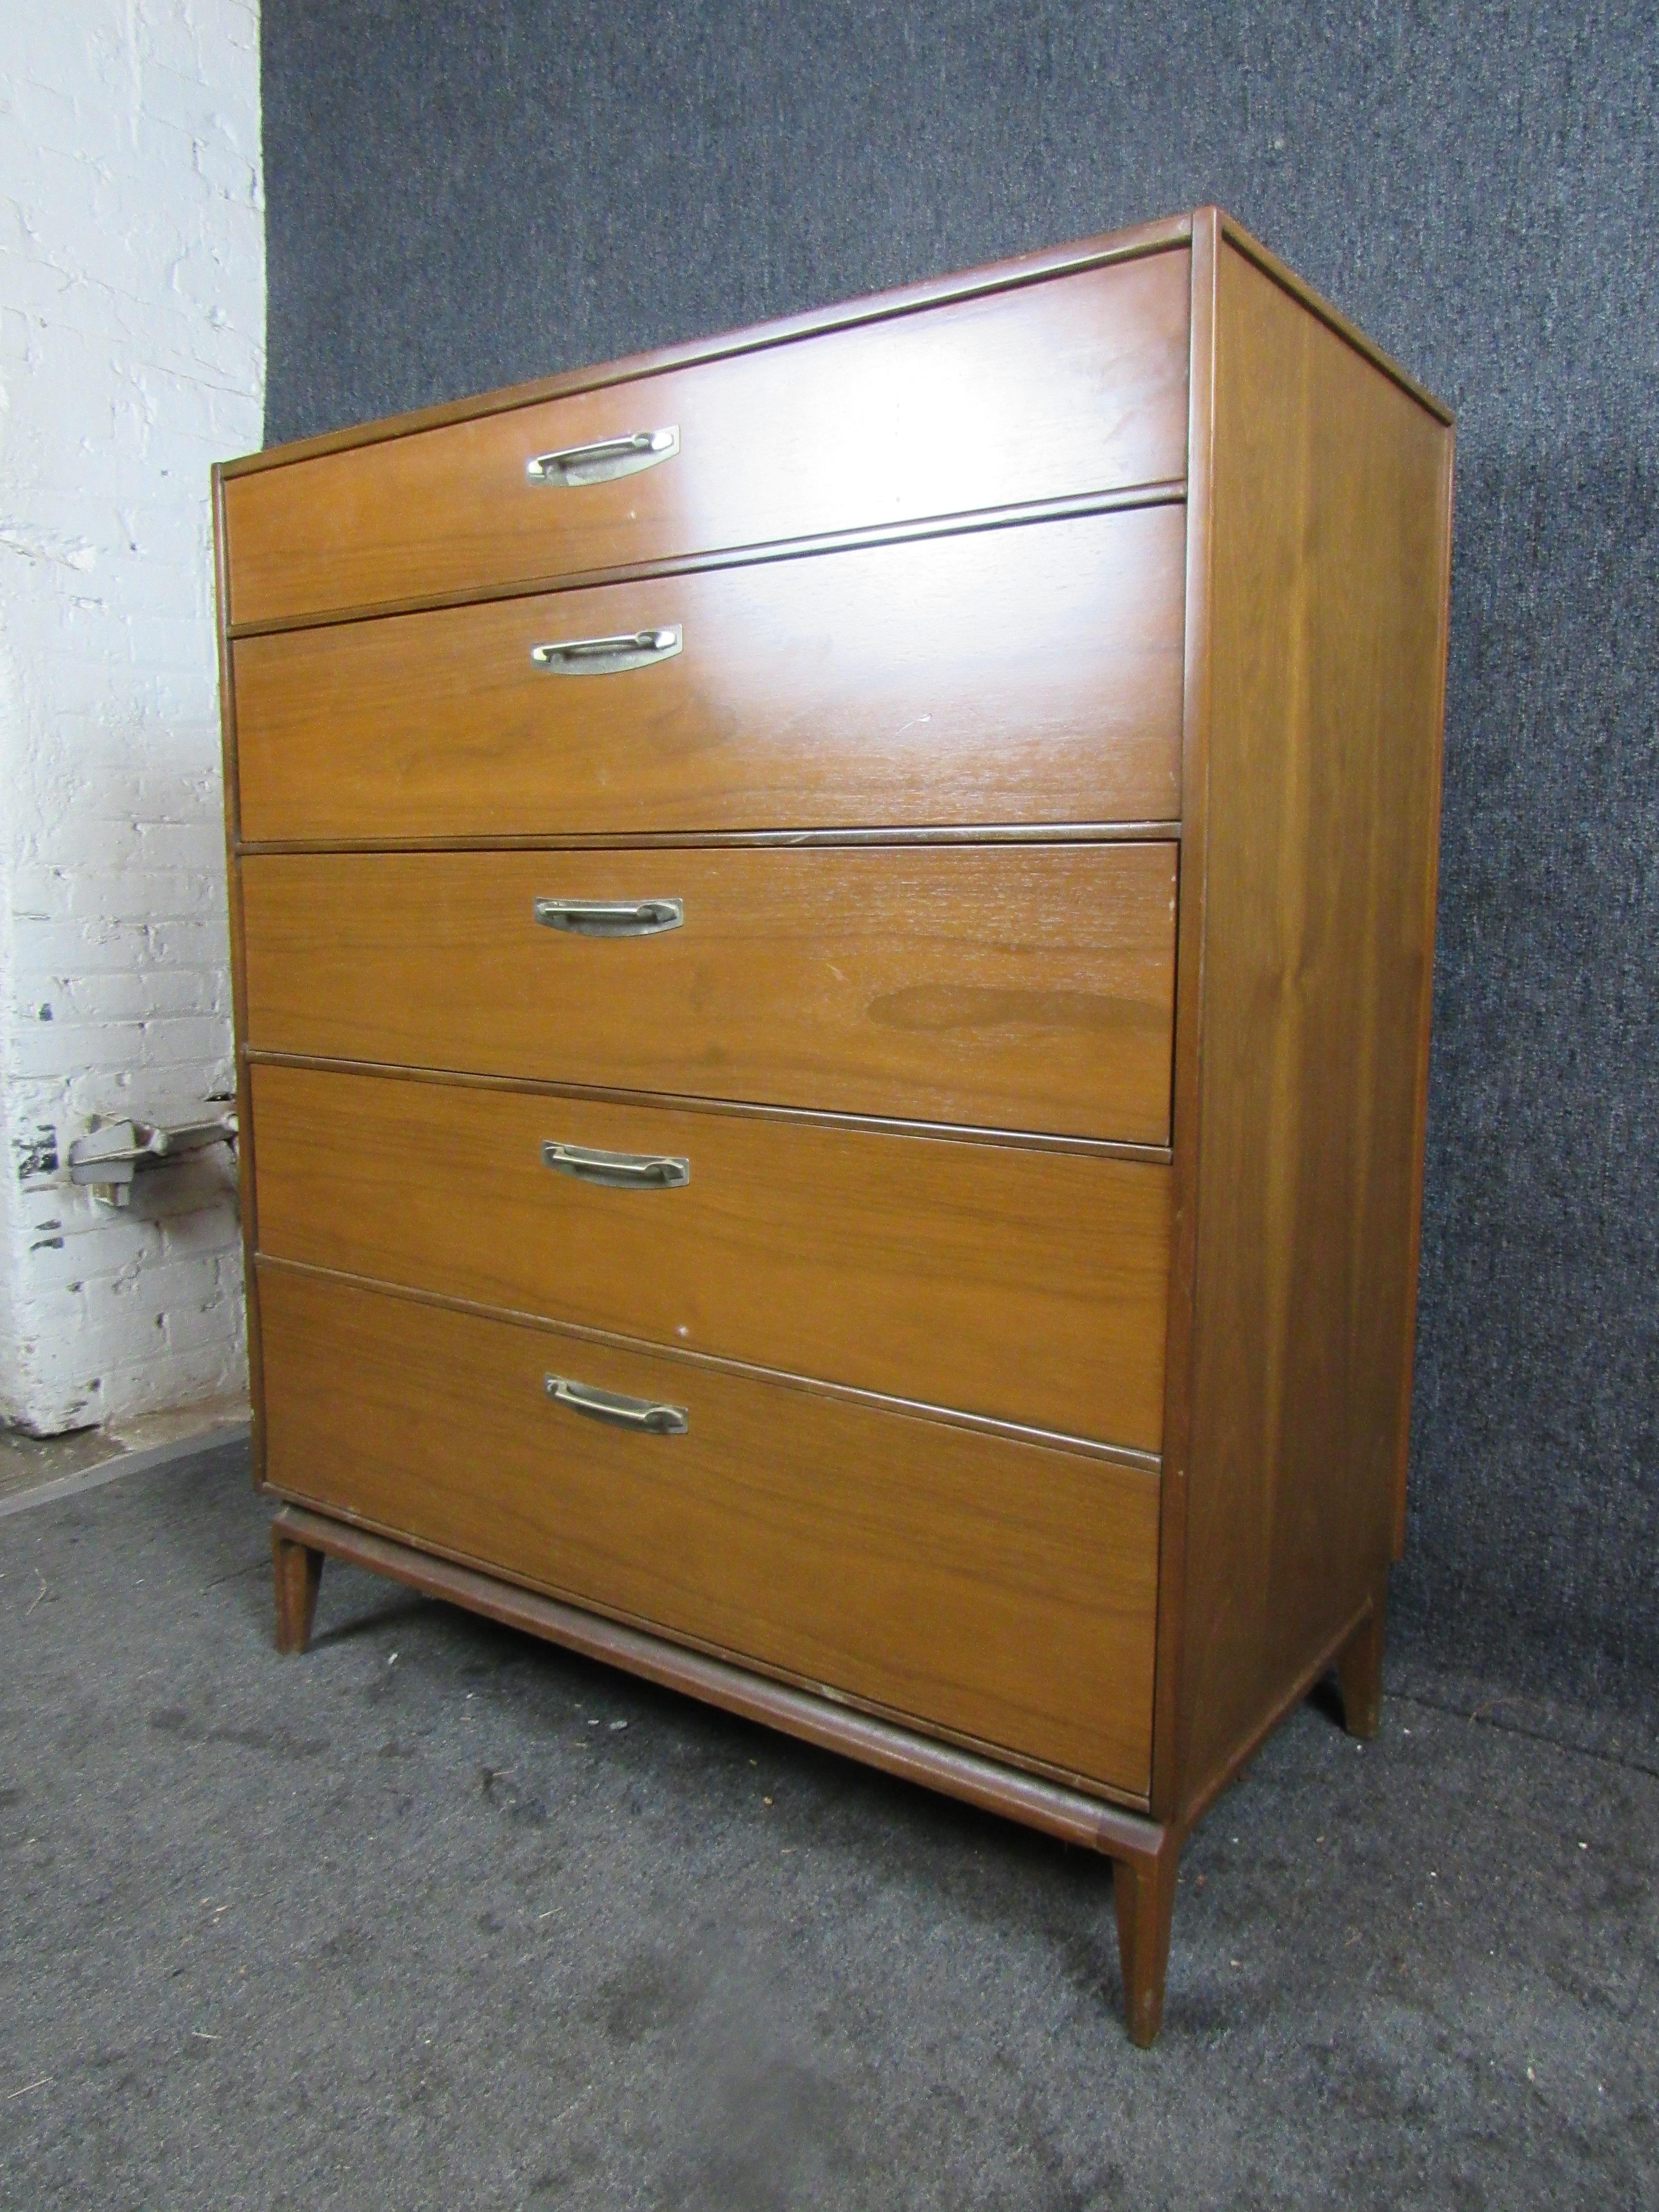 Gorgeous Mid-Century Modern vintage chest of drawers in a stunning walnut grain. Five pull-out drawers provide ample storage and organization, whether in the home or office. Unique metal pulls add a dramatic flair to the piece. 

